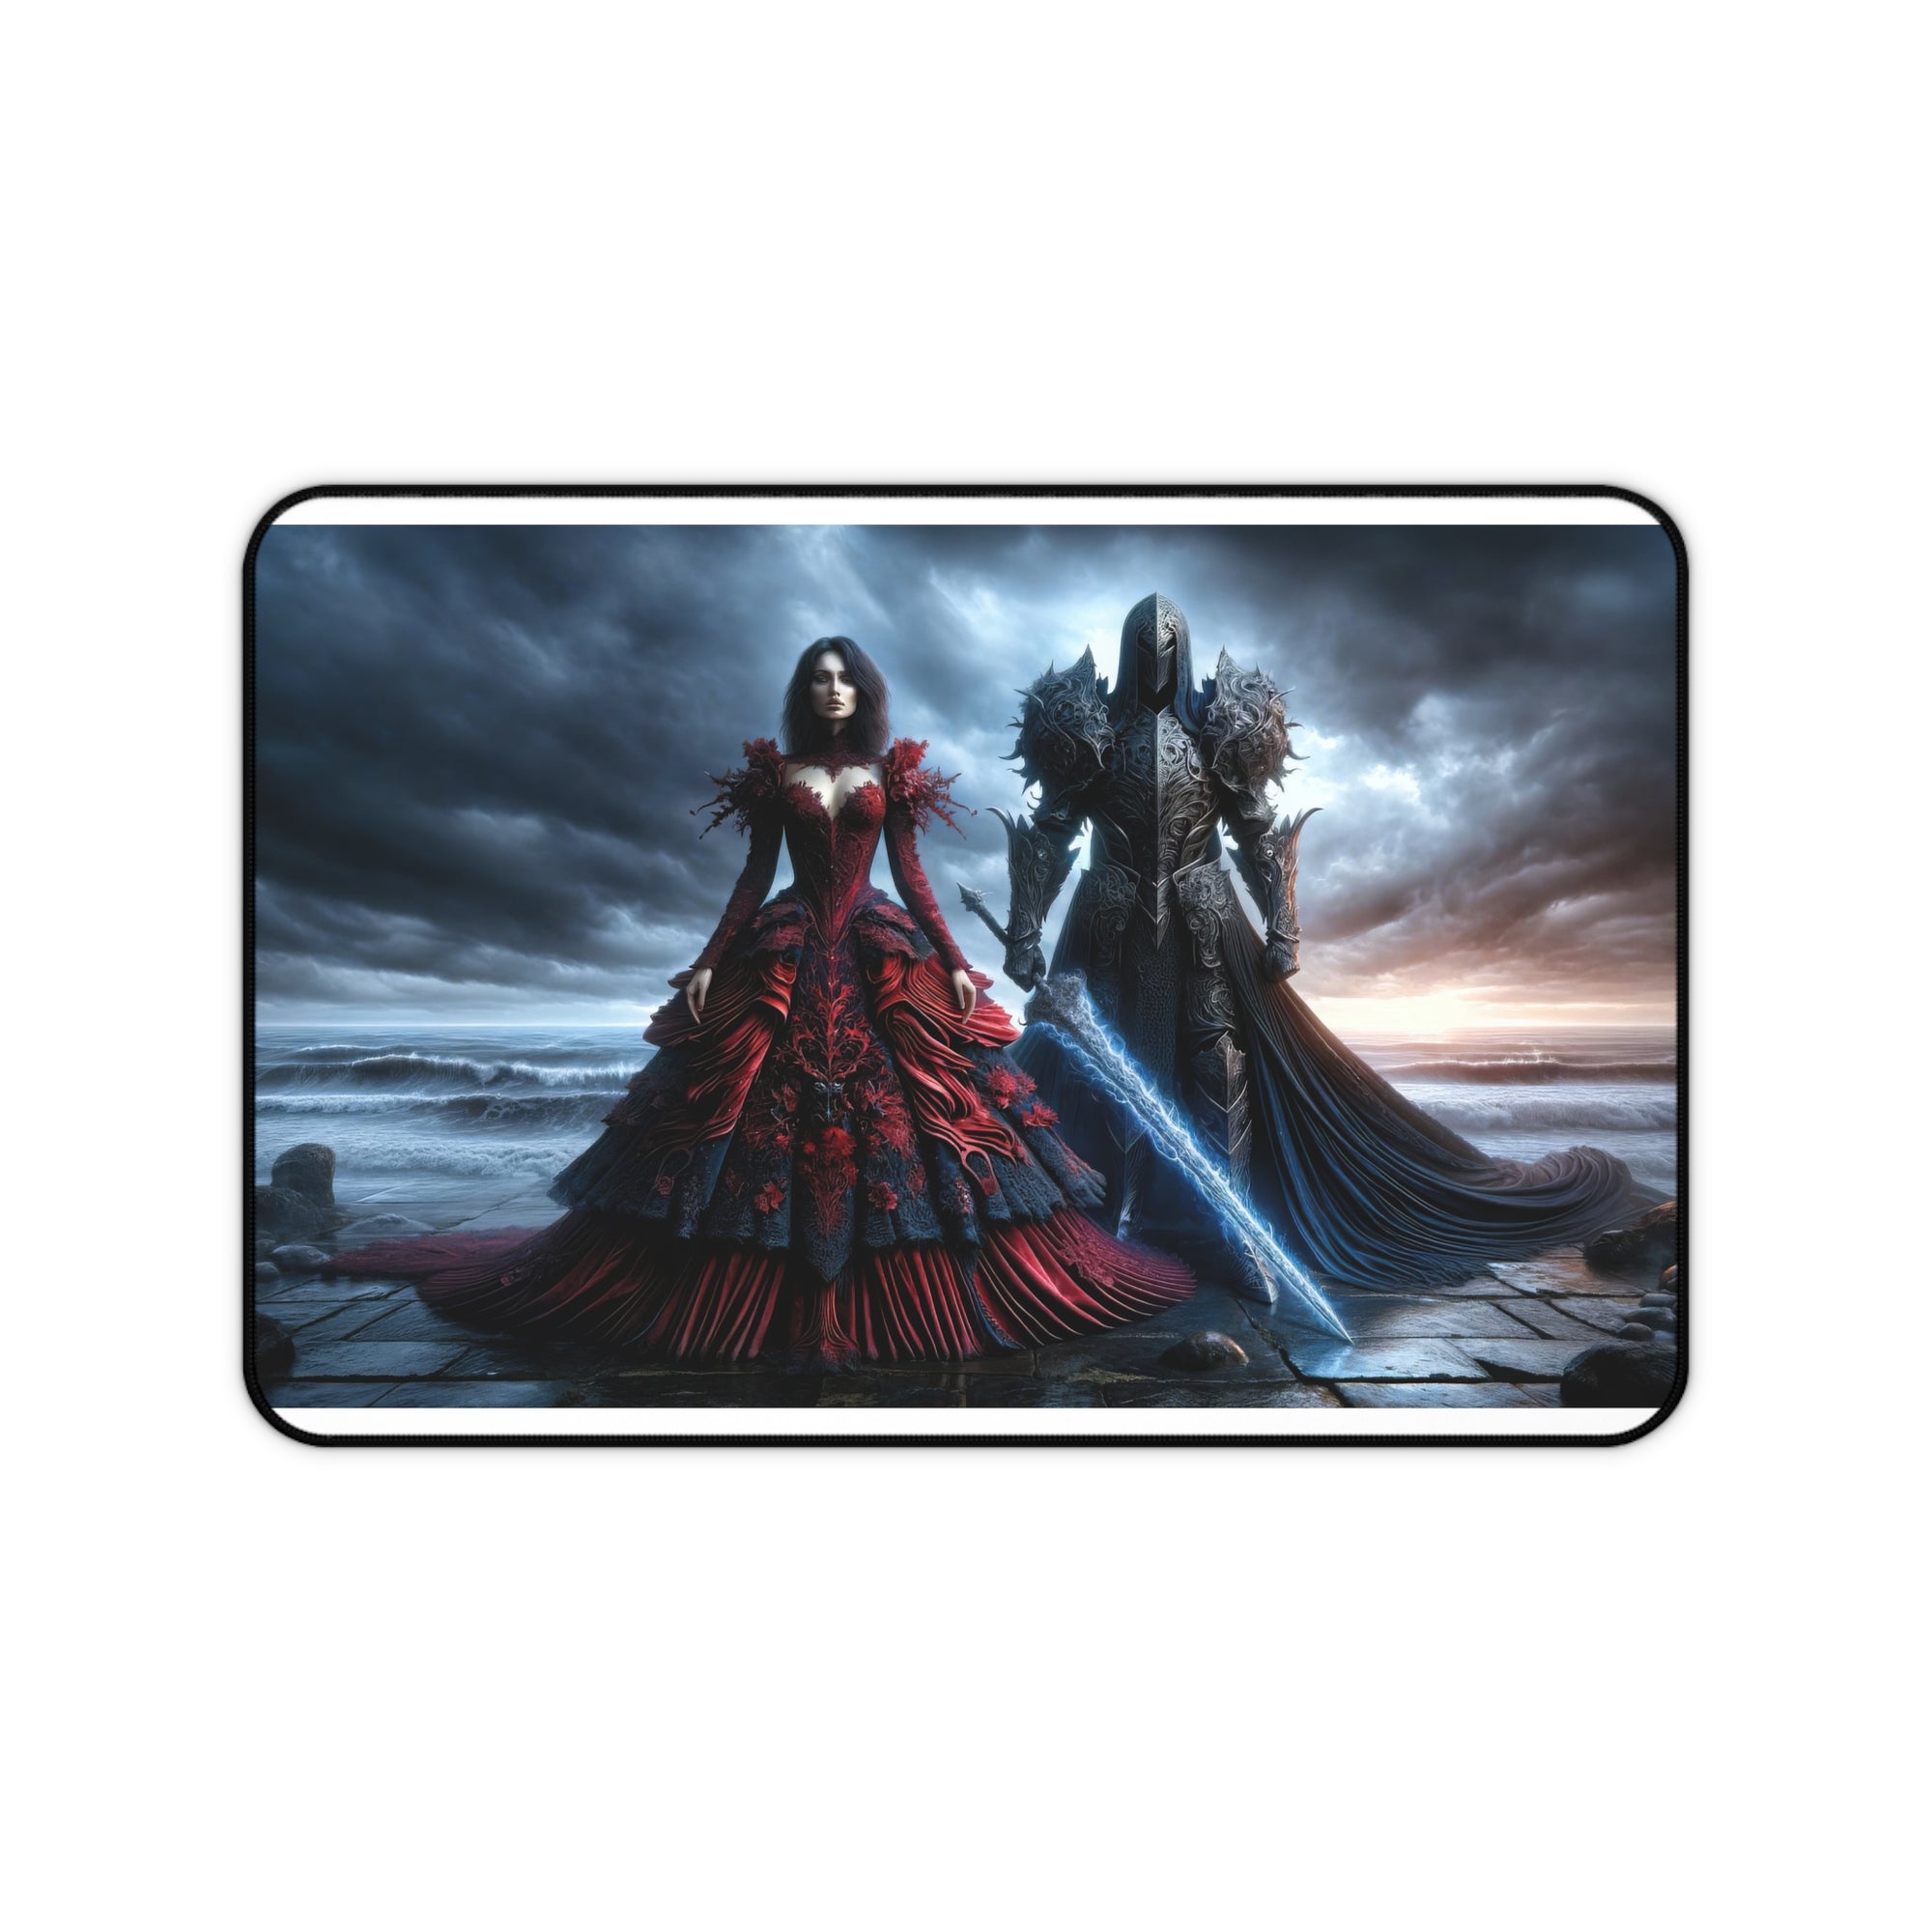 Twilight Waltz in Red and Obsidian Desk Mat